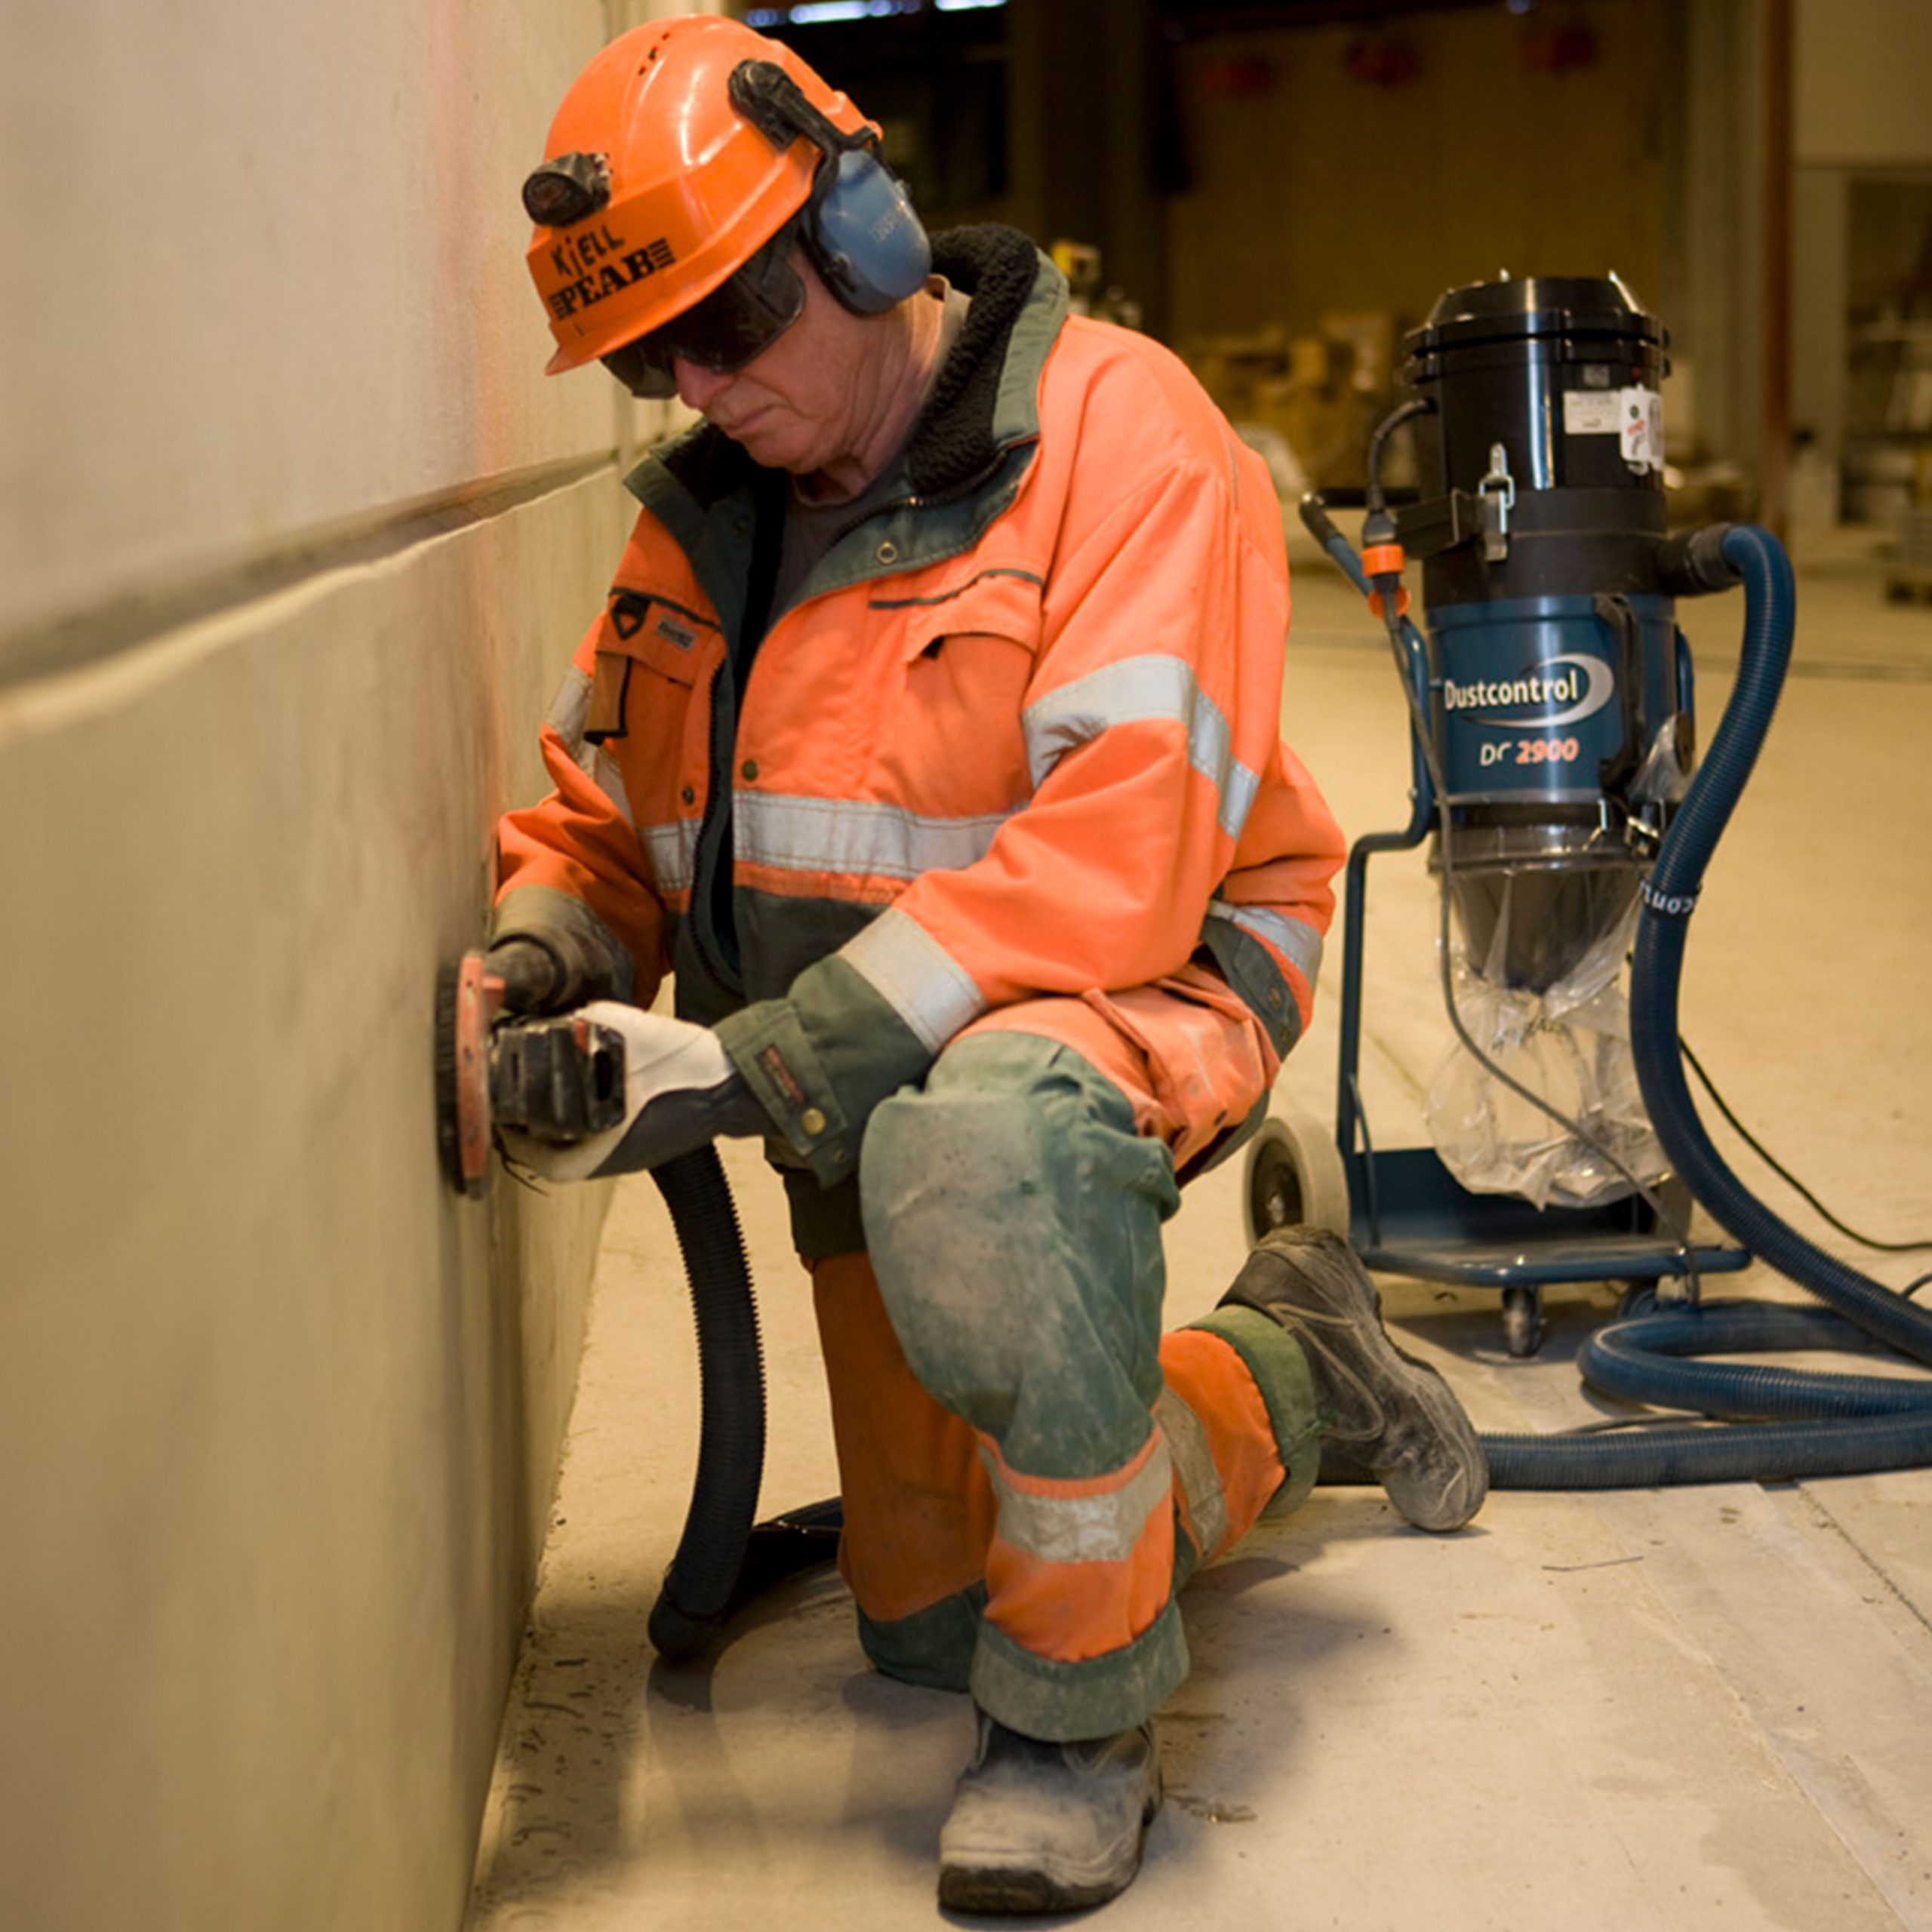 Putting the correct HSE measures in place to protect workers from harmful silica dust and airborne viruses